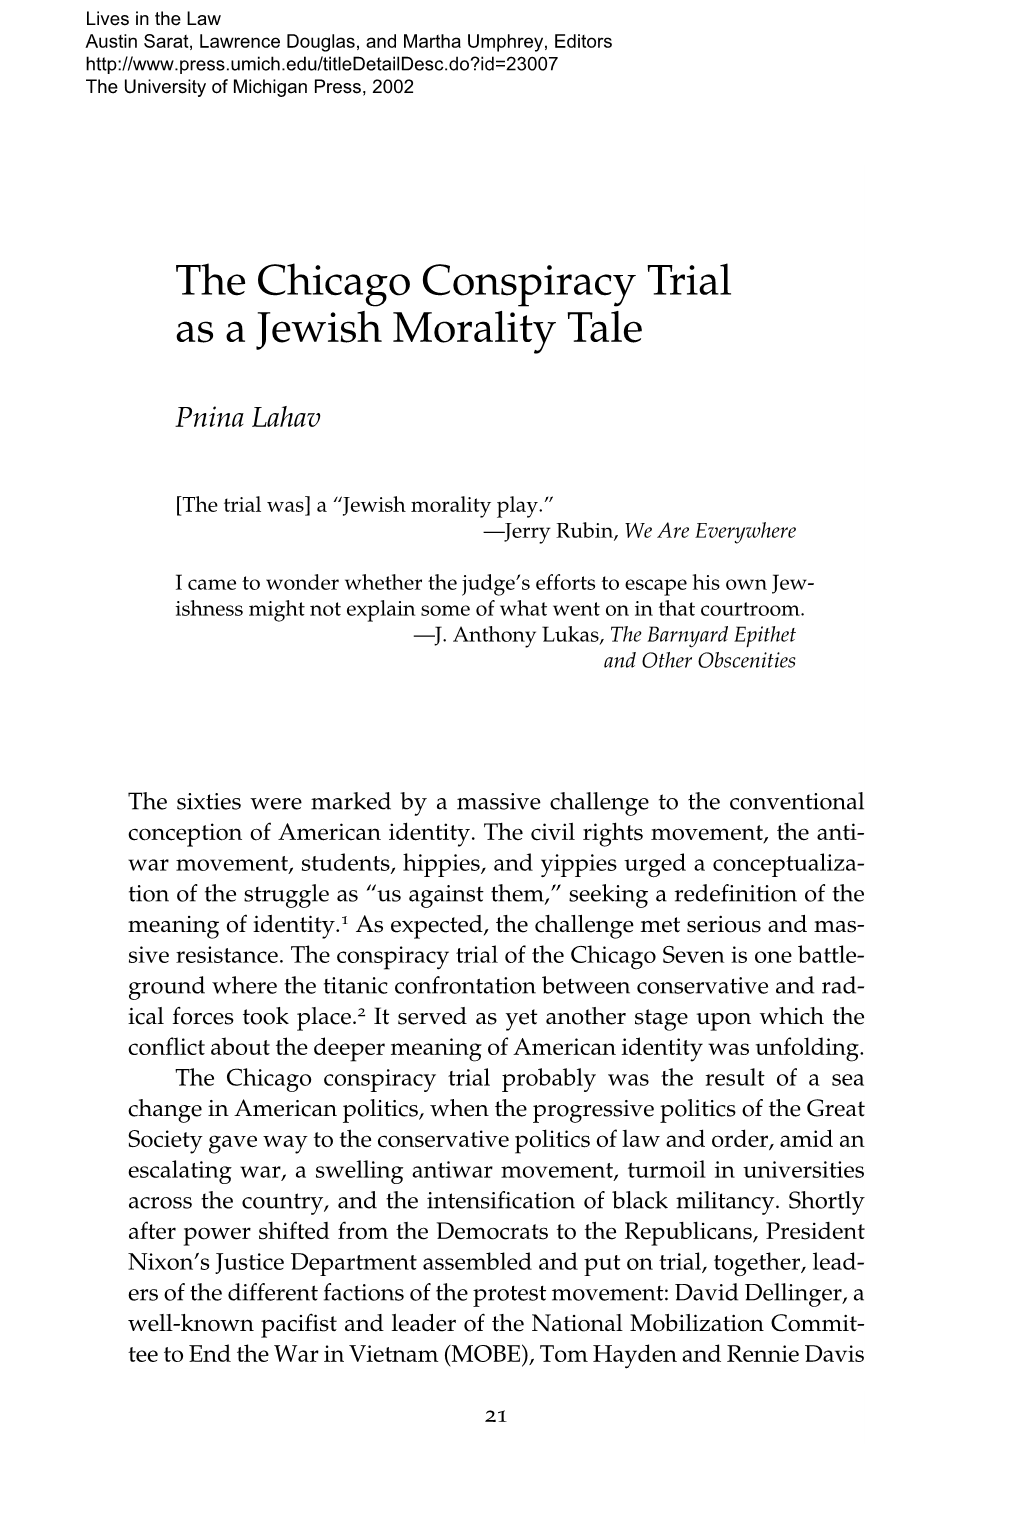 The Chicago Conspiracy Trial As a Jewish Morality Tale